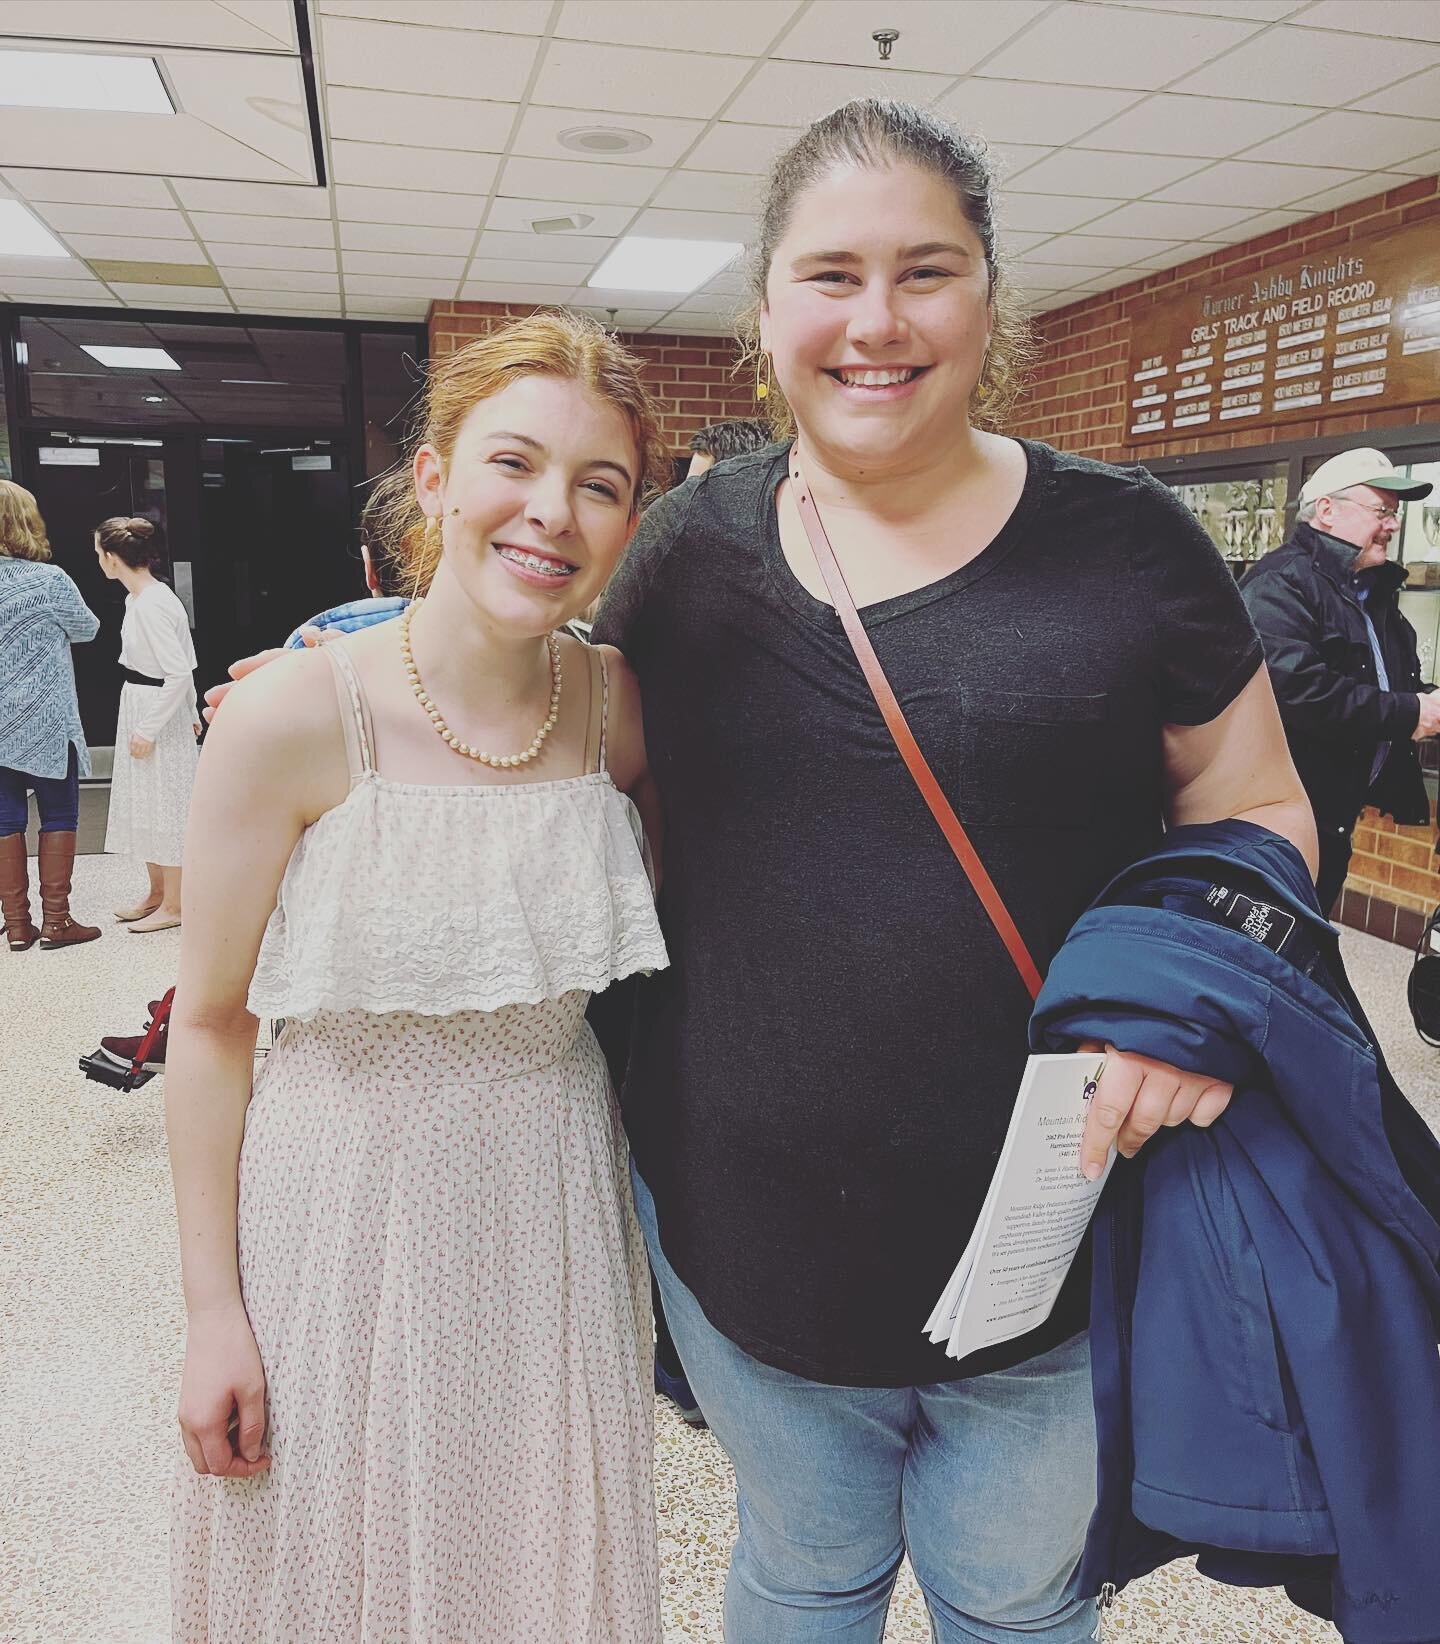 This girl was a SPECTACULAR Sophie in Mamma Mia! on Saturday.

I&rsquo;m so proud of you @audreybibliofila ! I&rsquo;m in awe of how much you have grown since 7th grade, and I&rsquo;m honored to be a part of your vocal journey.